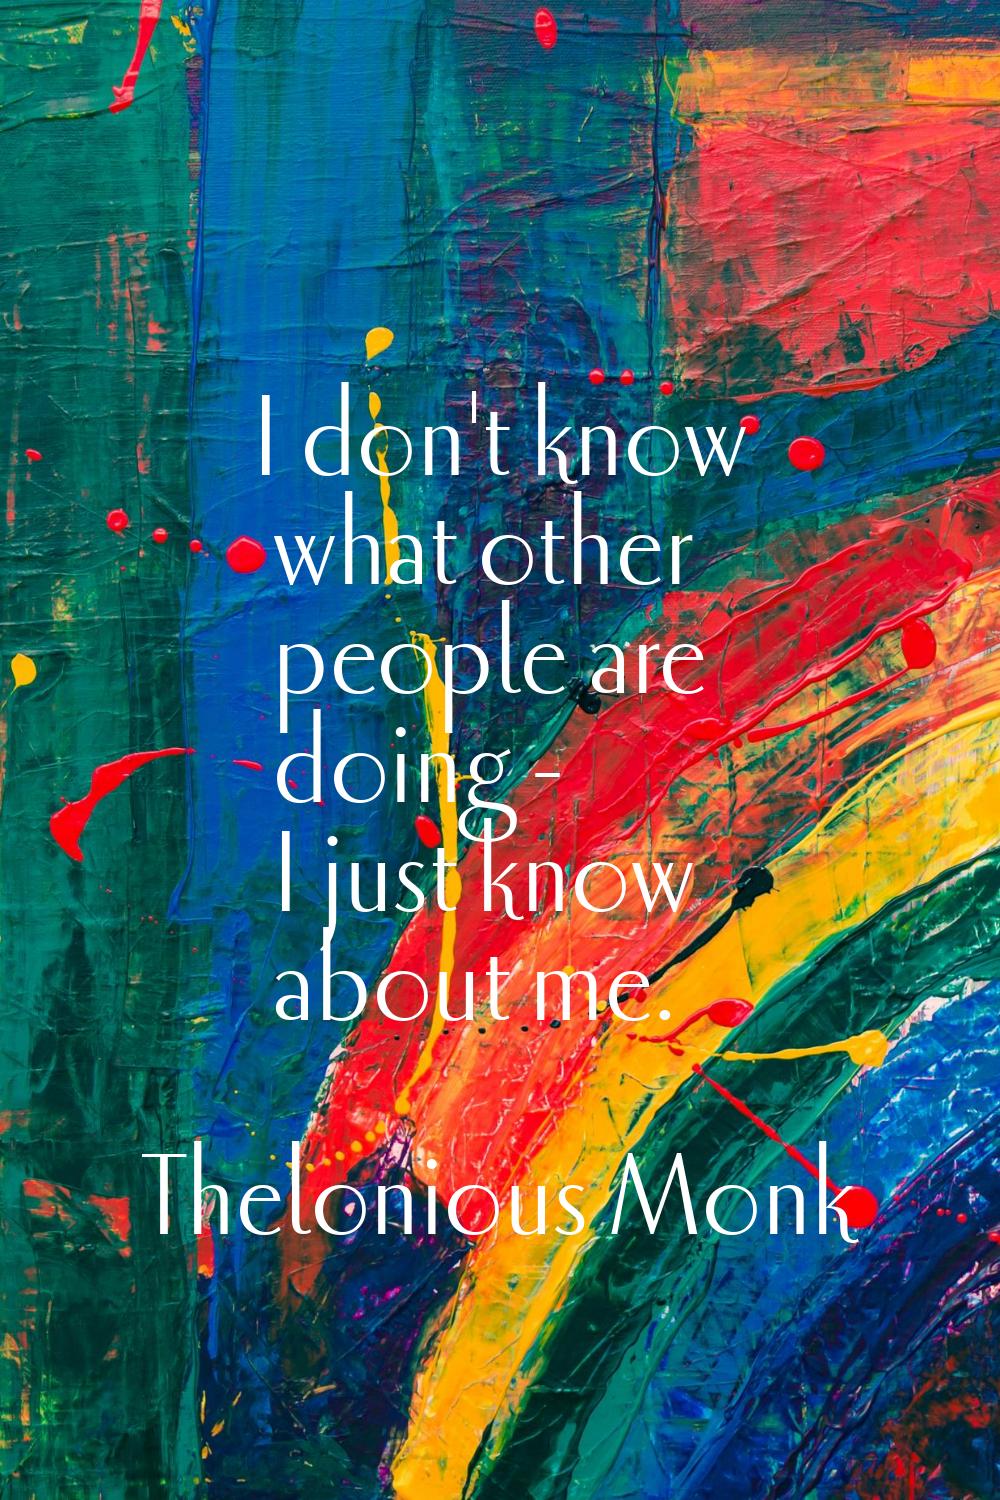 I don't know what other people are doing - I just know about me.